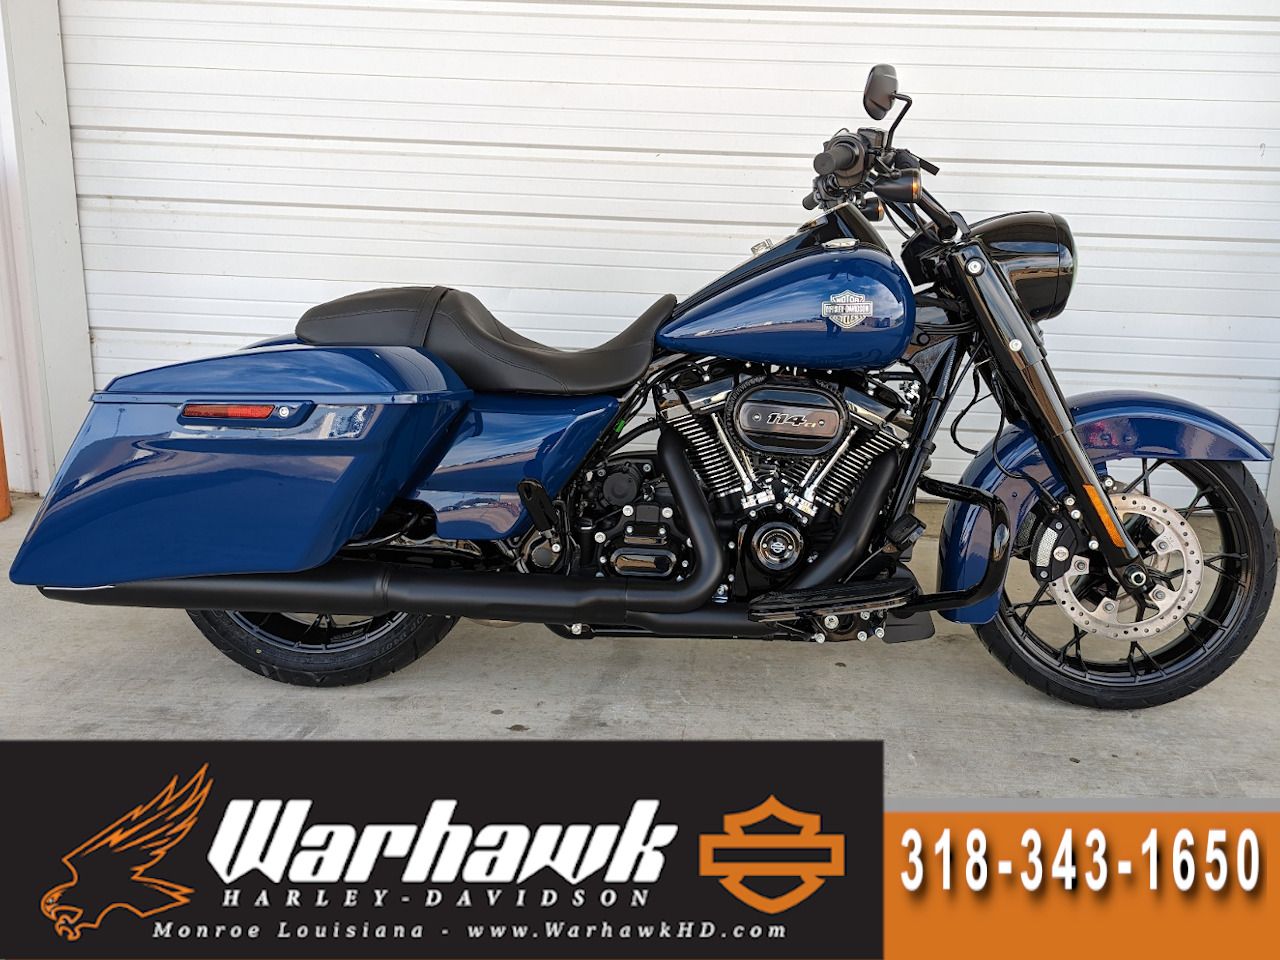 new 2023 harley davidson road king special for sale near me - Photo 1